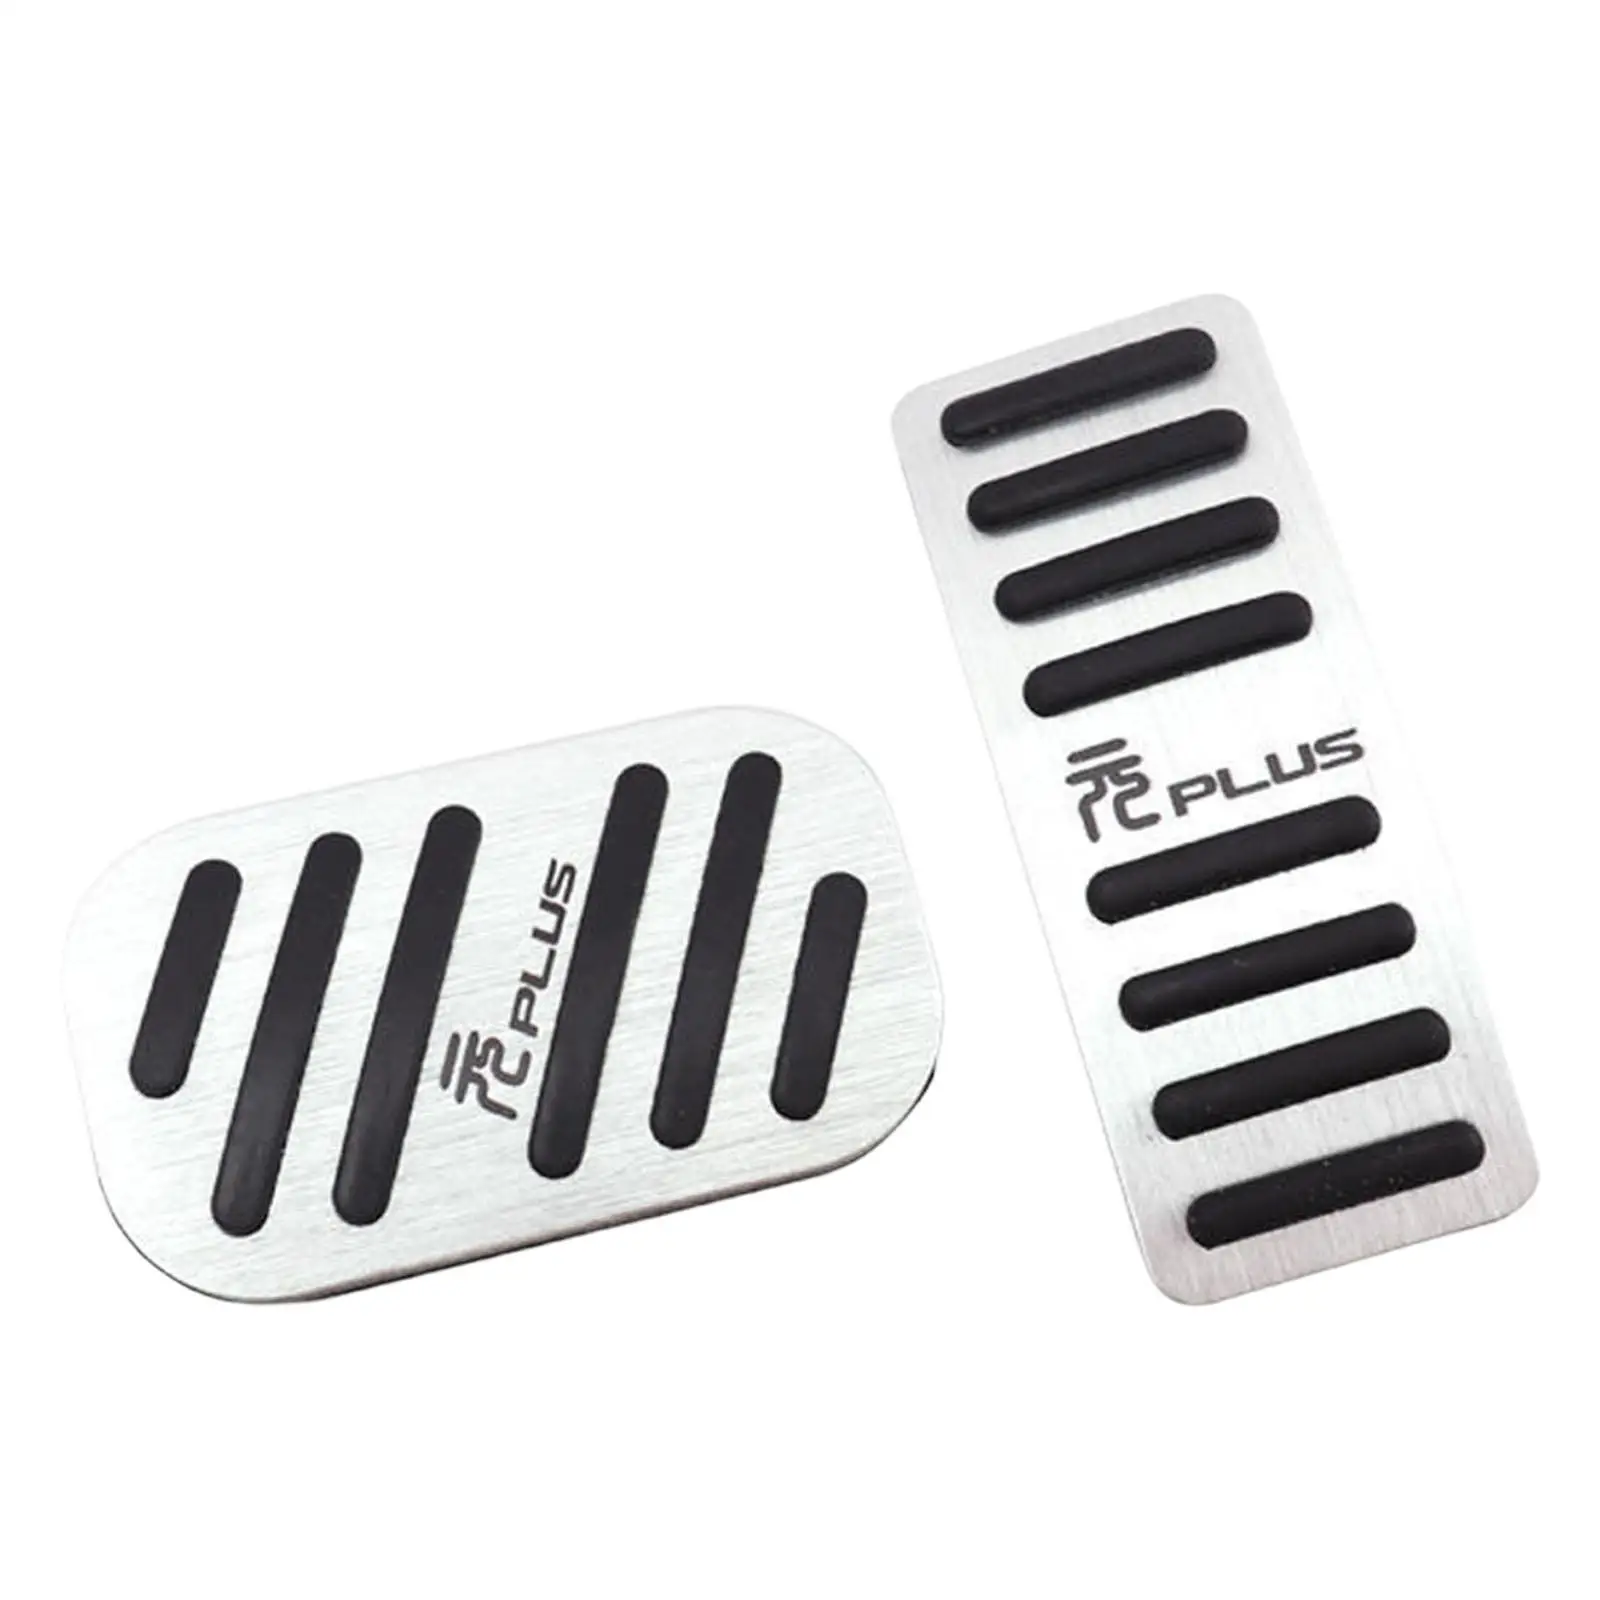 Brake Pedal Cover Gas Pedal Cover Kit Aluminium Alloy Foot Pedals Pads for Byd